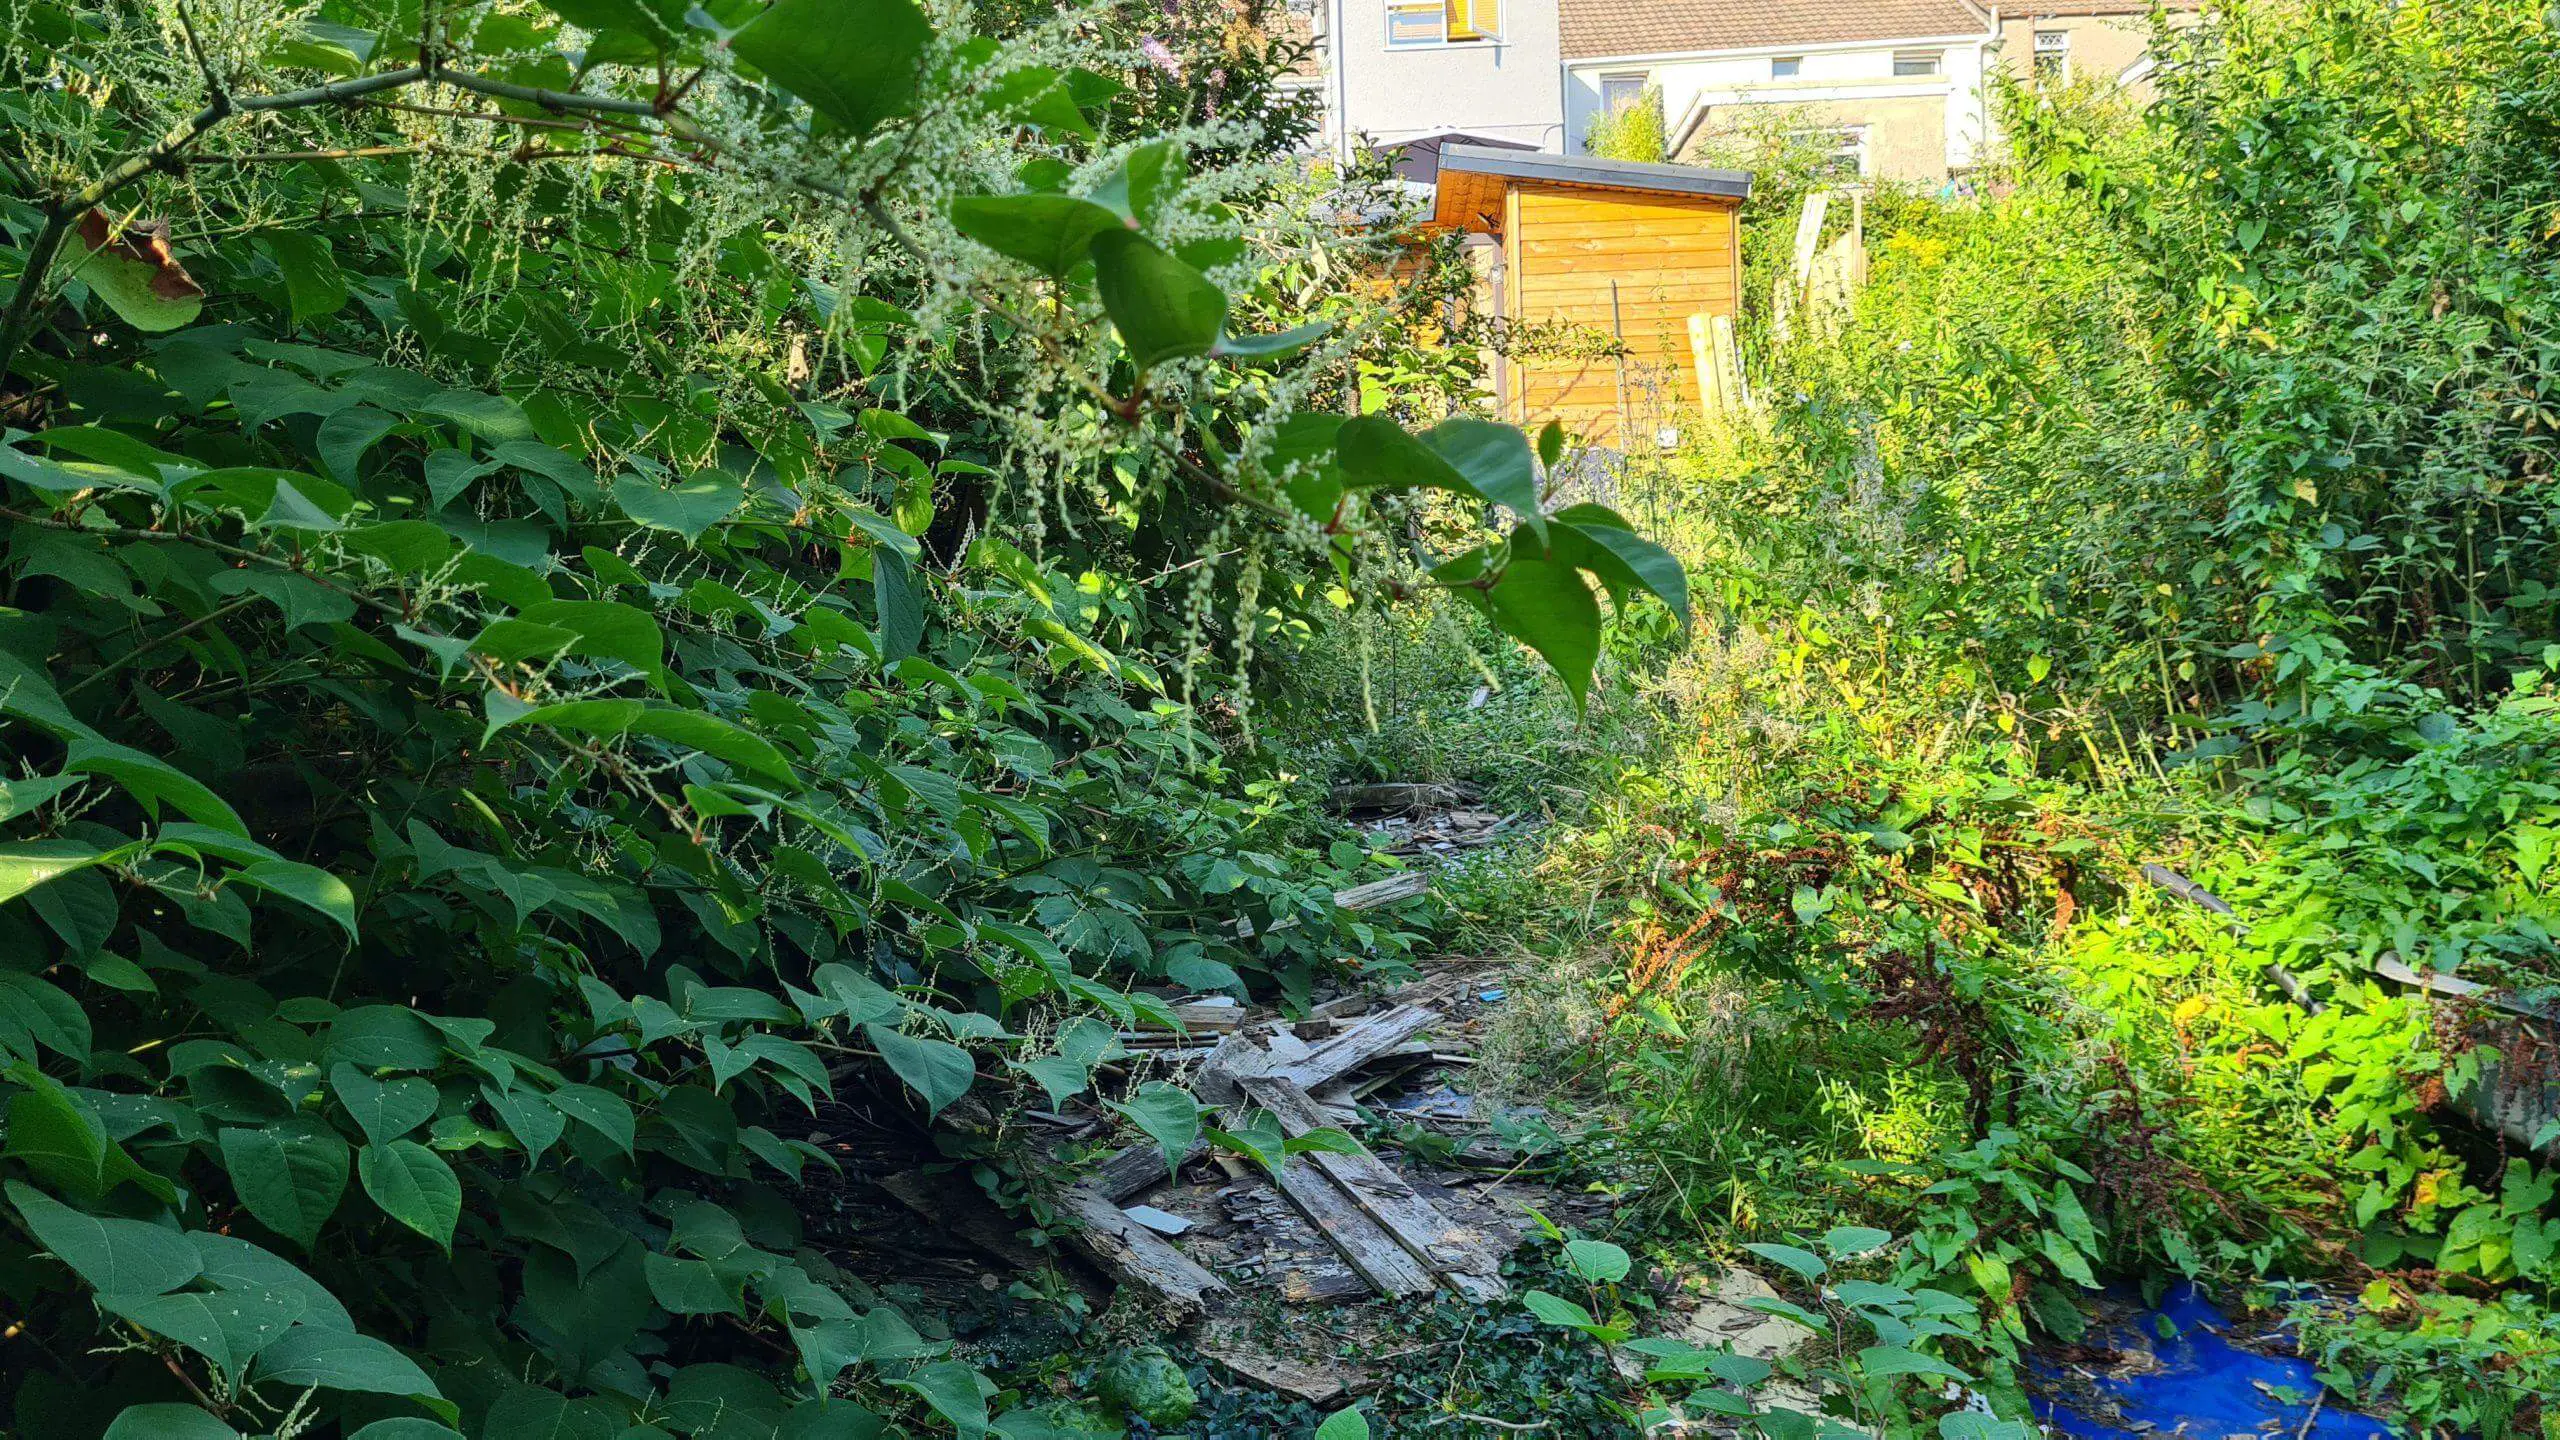 A garden in desparate need of clearing of invasive weeds for both access and the protection of the property value